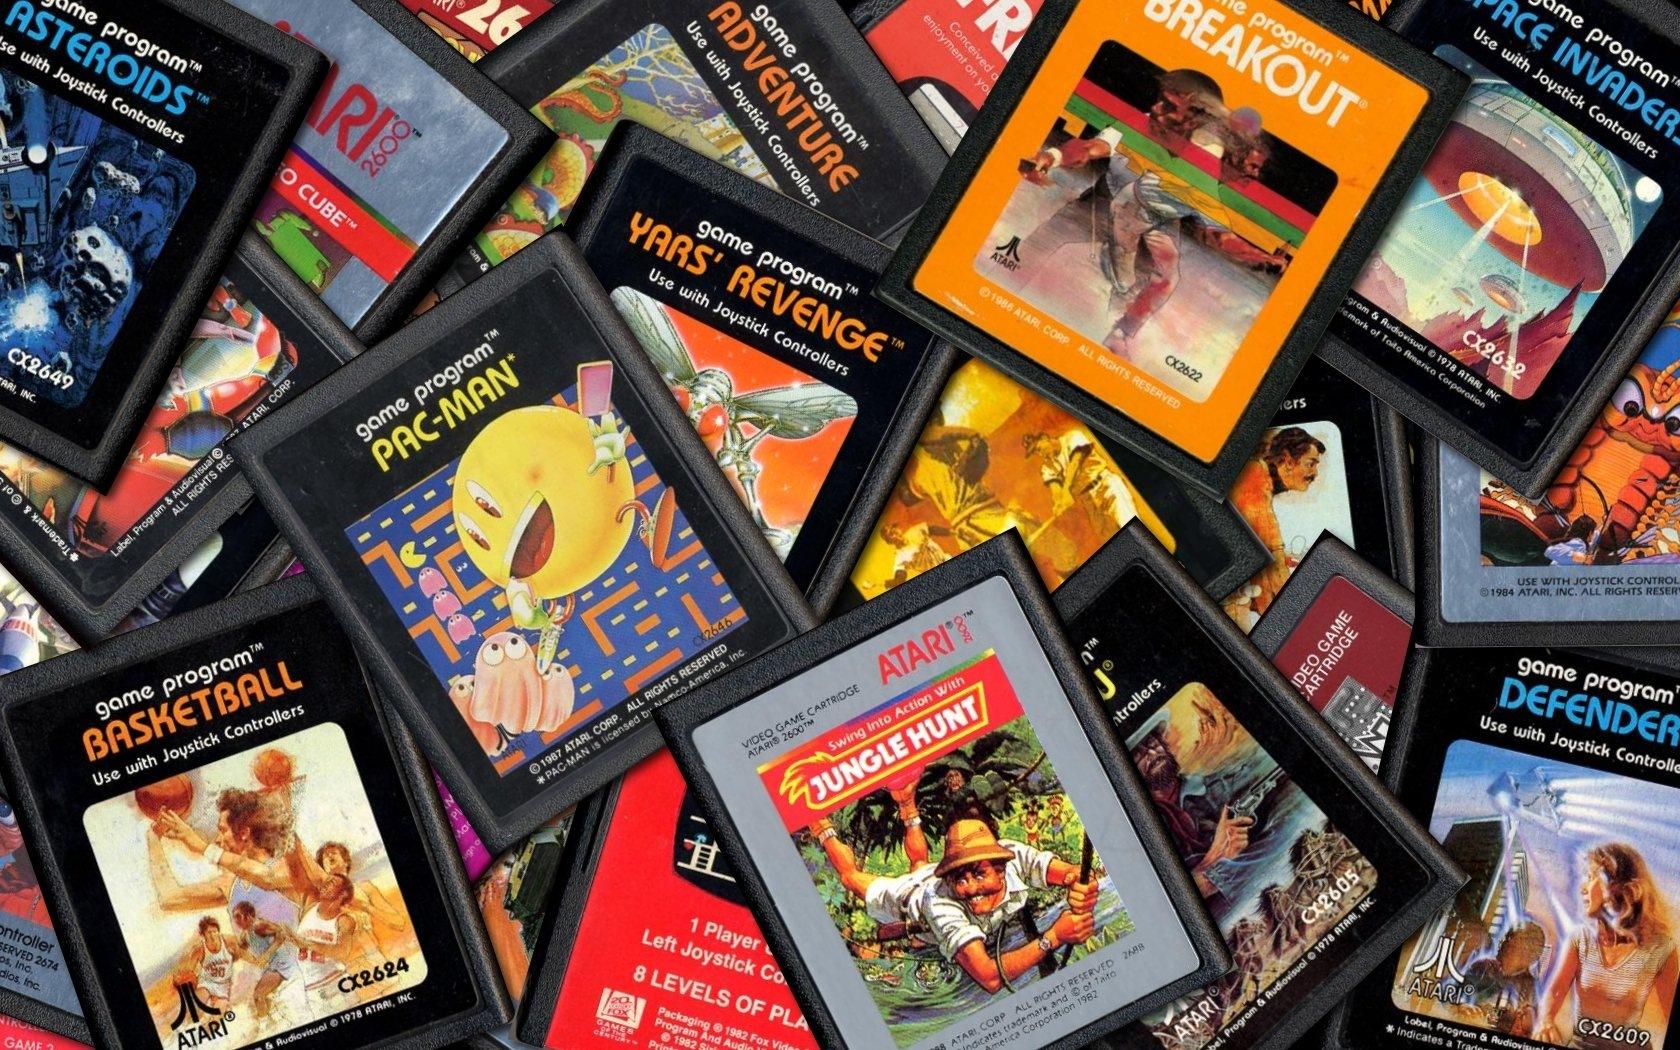 For Atari, preservation isn't just about saving old games